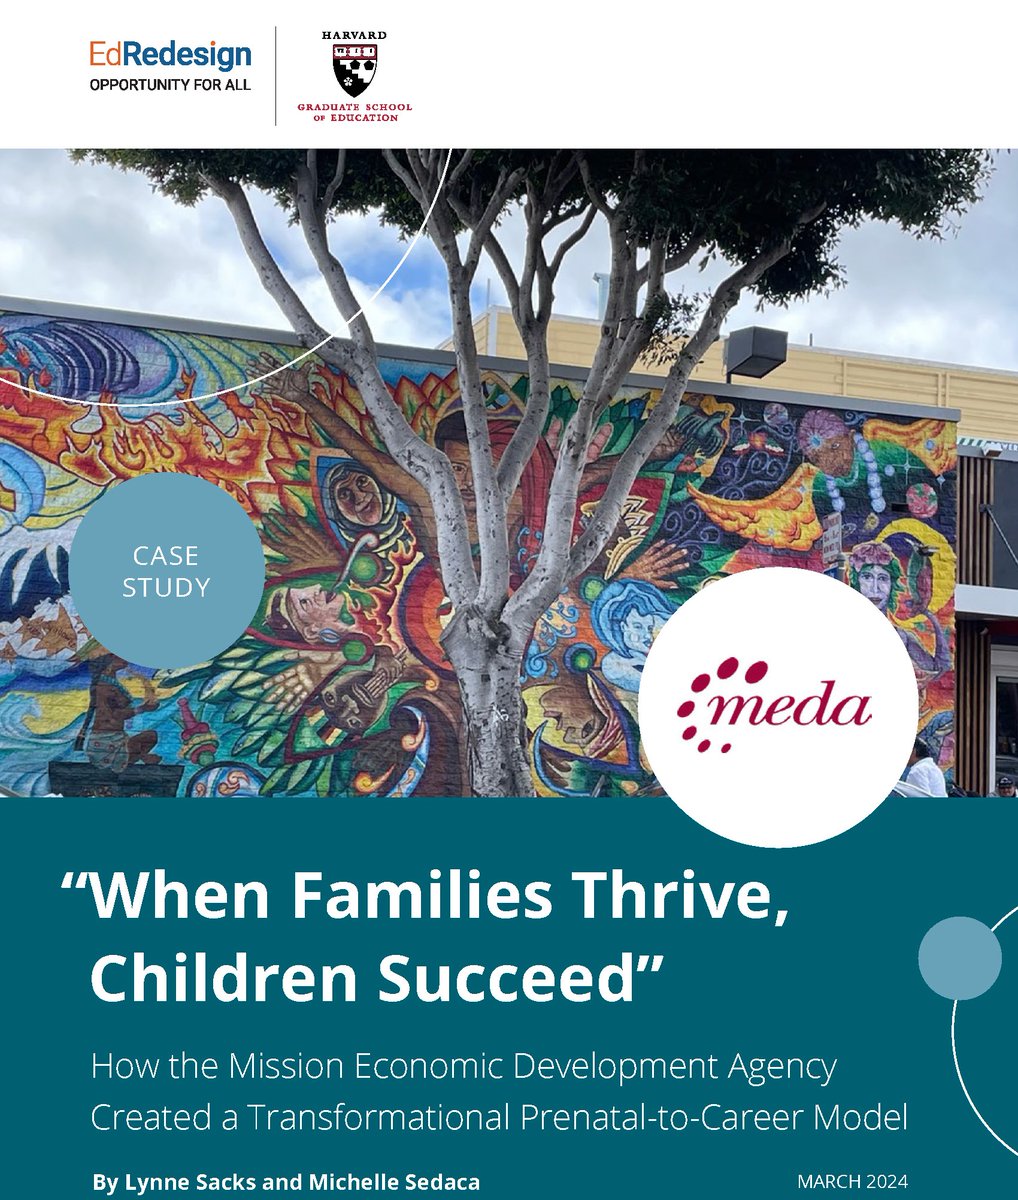 Excited to release our new case study detailing how @medasf created a transformational prenatal-to-career model in San Francisco’s Mission District. Read the case and highlights: bit.ly/3TlhUhh @hgse @harvard